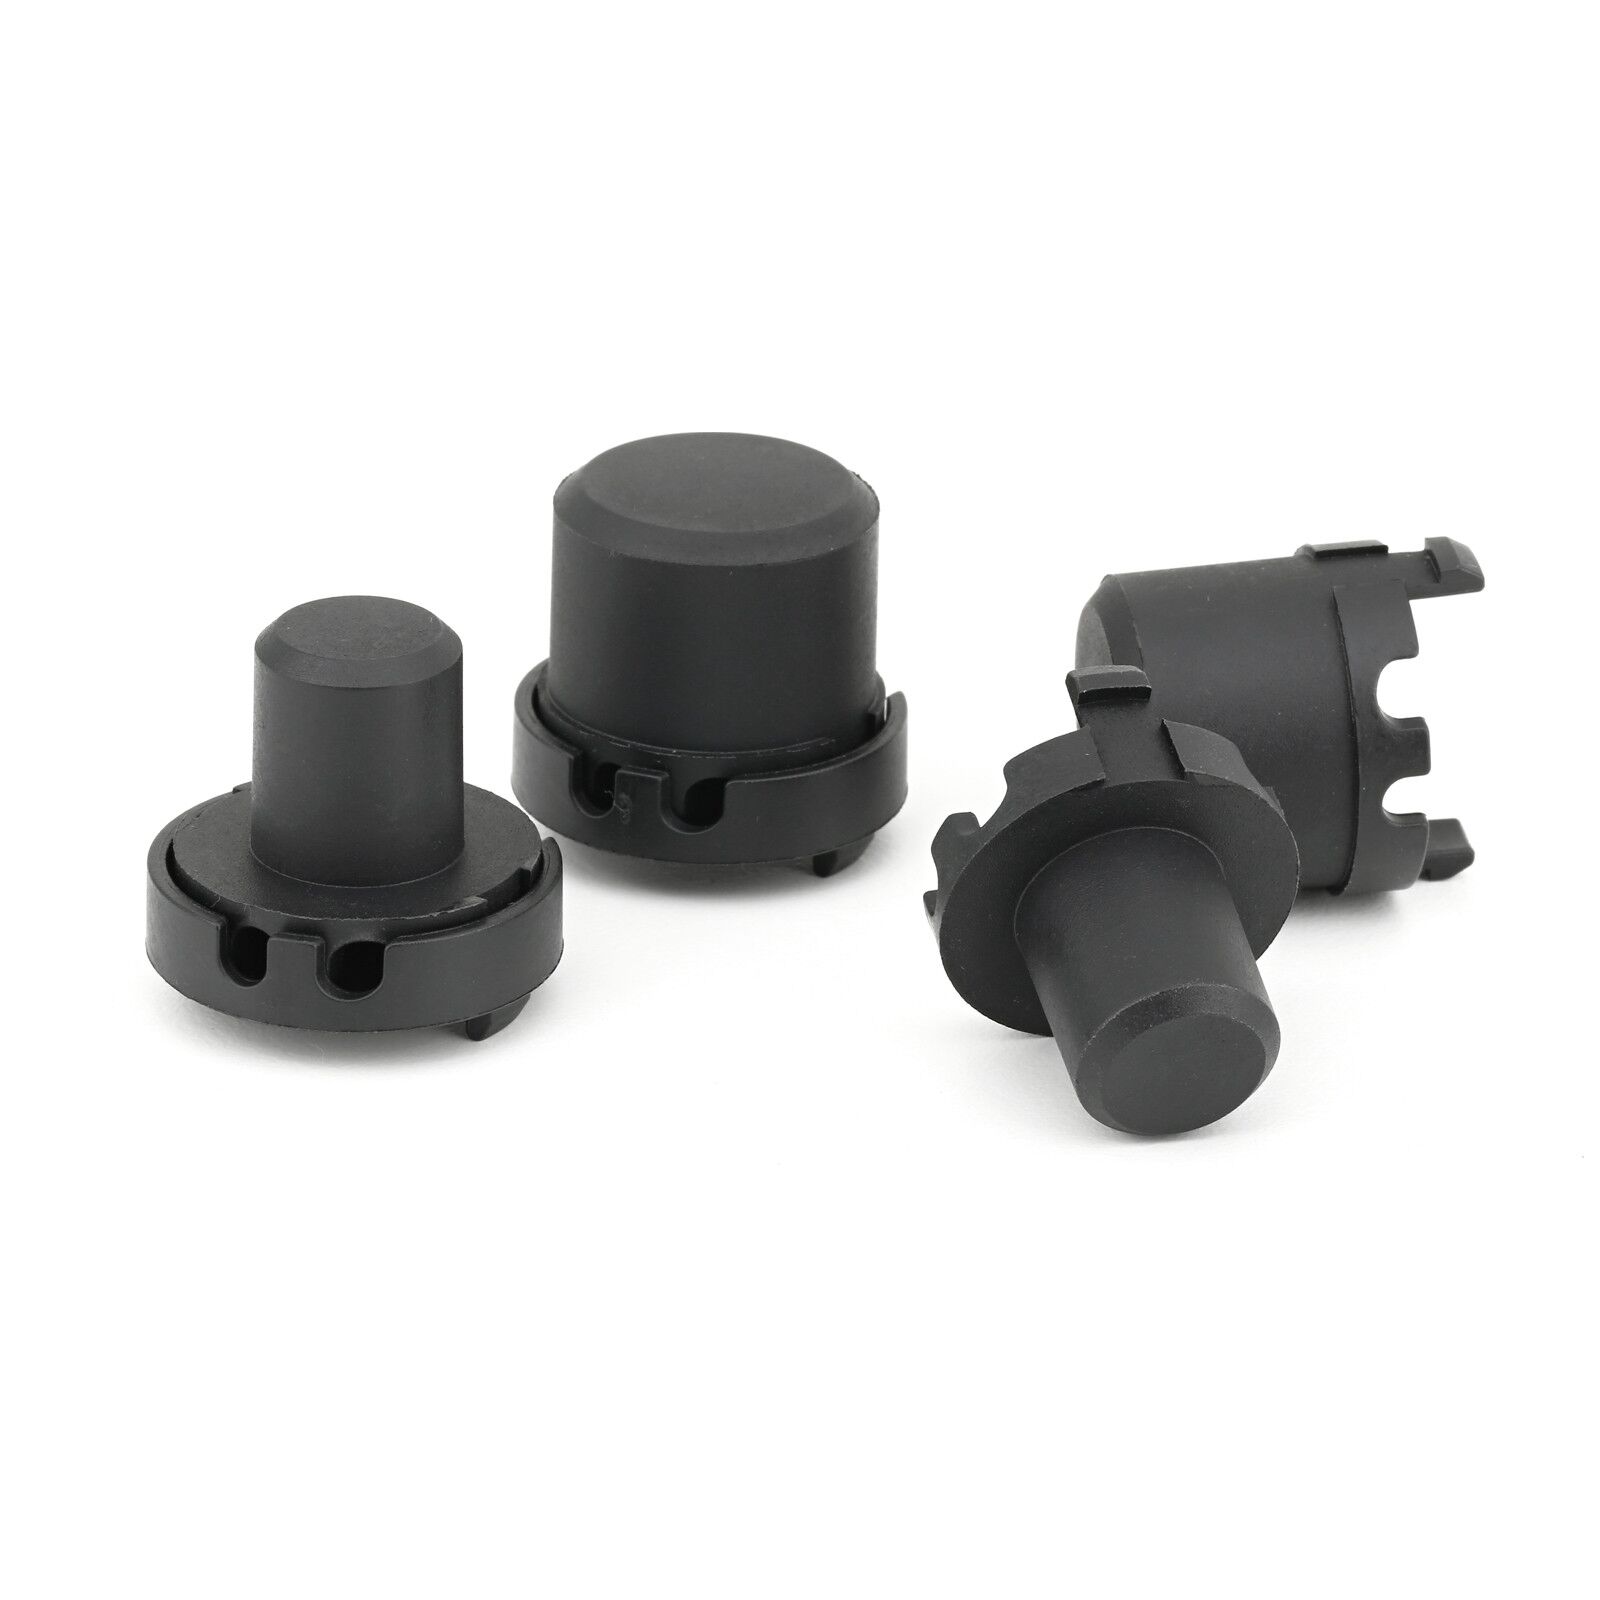 Chihiros - T5/T8 Adapter for S-Series